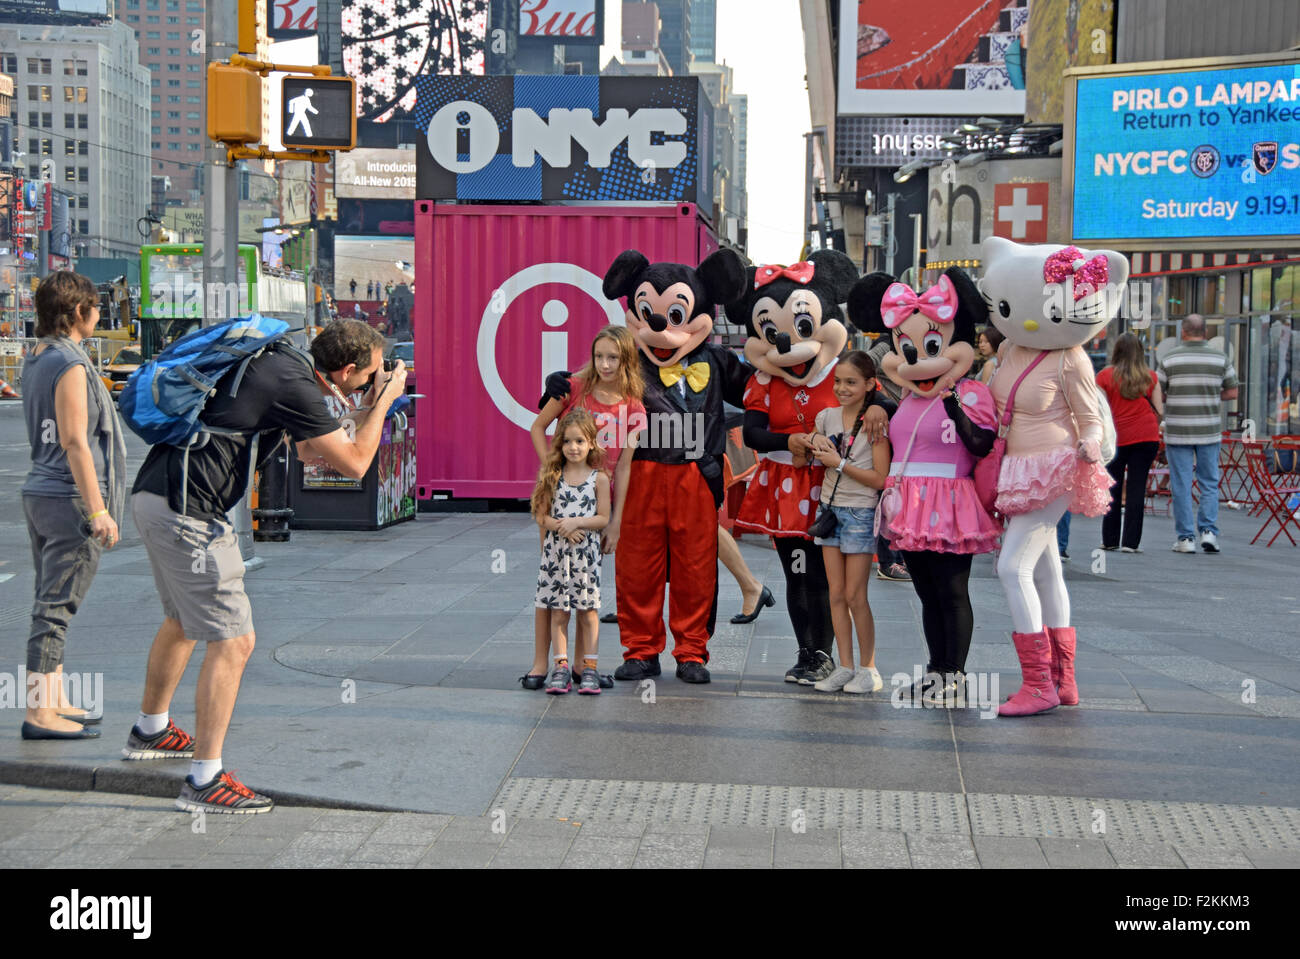 Cartoon & comic characters solicit tourists in Times Square in New York to pose for photos in exchange for a tip. Stock Photo